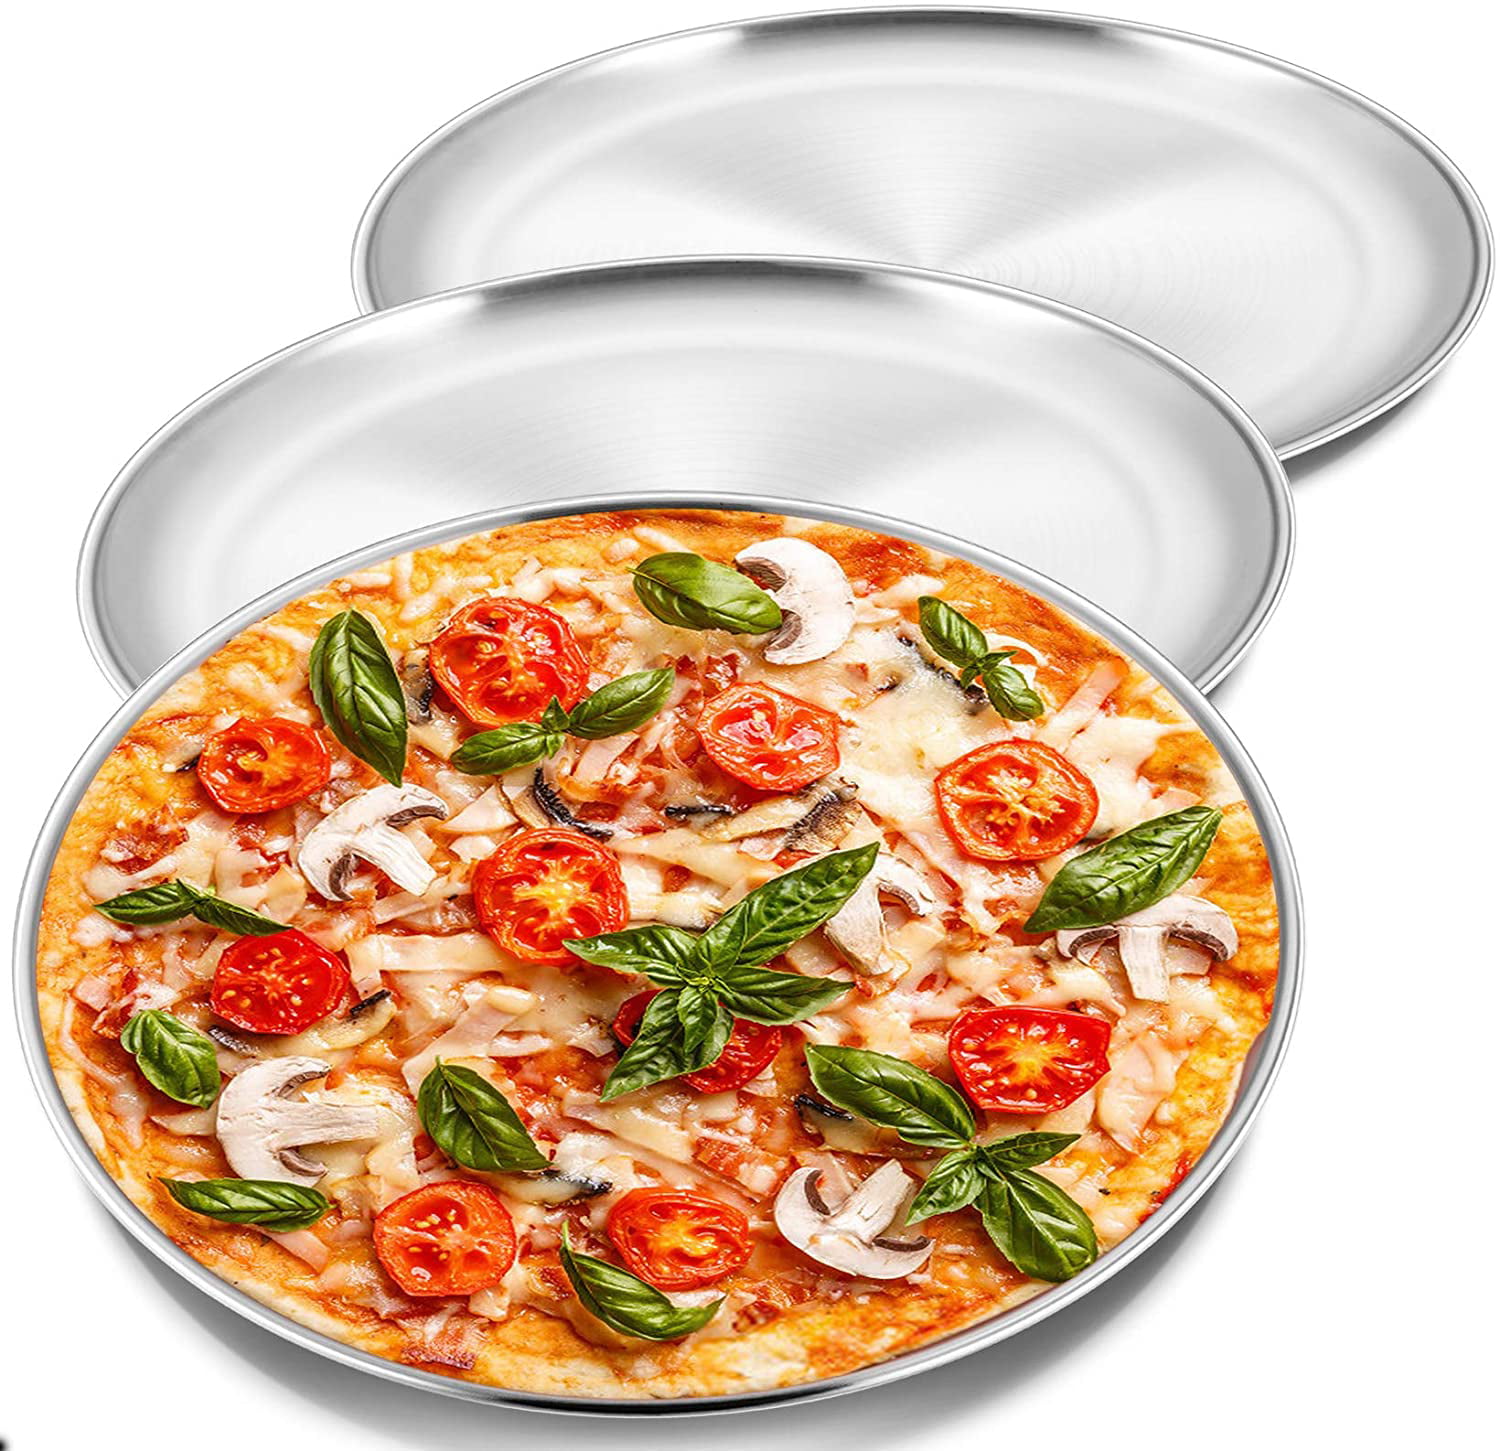 WEZVIX Pizza Pan Set of 2 Pizza Crisper Pan Bakeware Round for Home Kitchen Restaurant 12 Inch Stainless Steel Pizza Tray for Oven Baking Dishwasher Safe & Heavy Duty